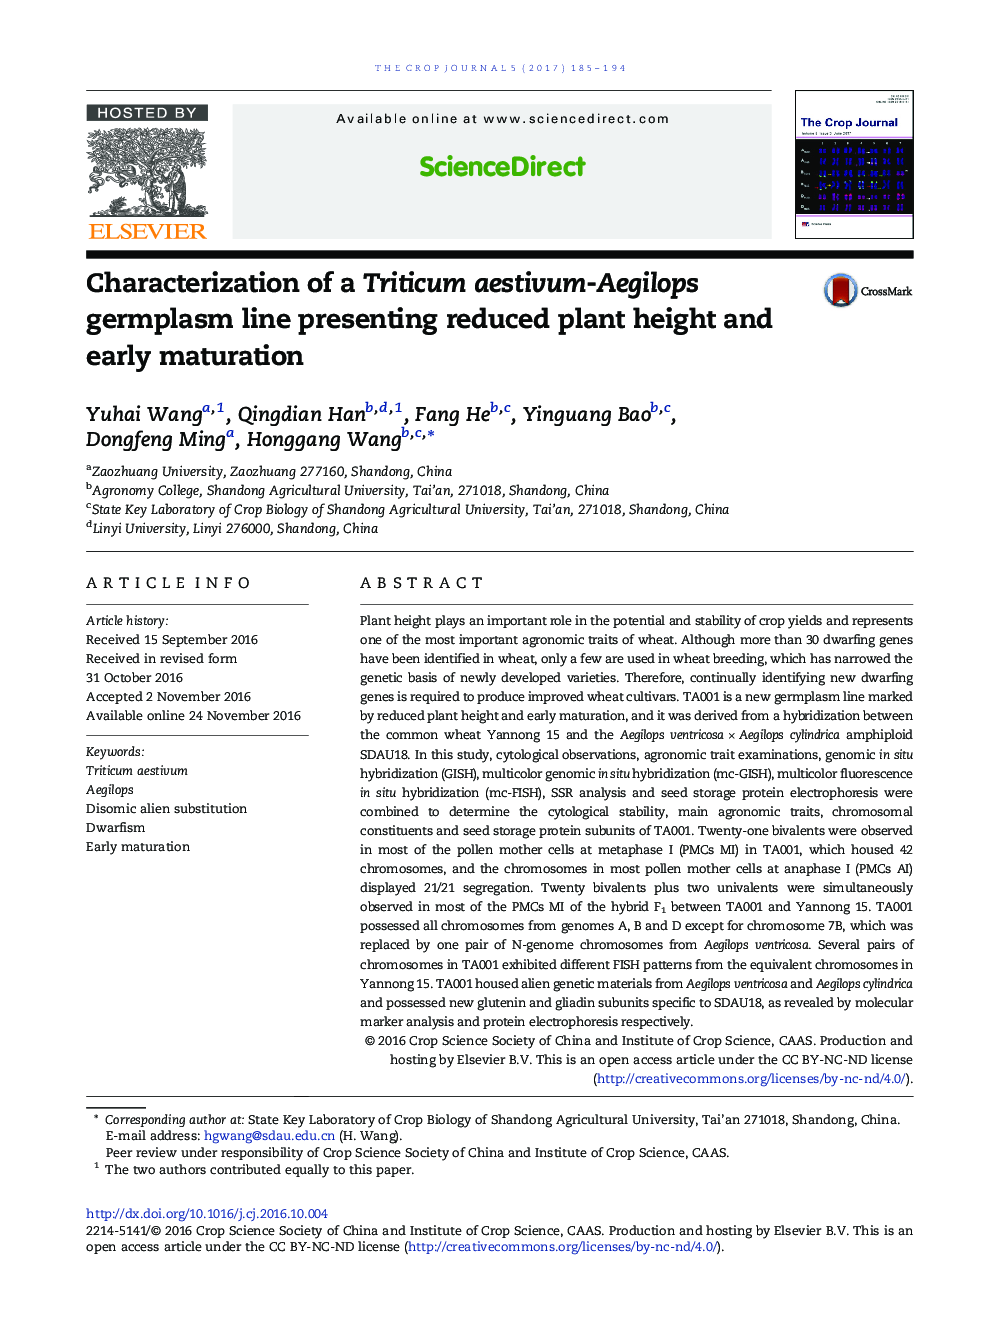 Characterization of a Triticum aestivum-Aegilops germplasm line presenting reduced plant height and early maturation